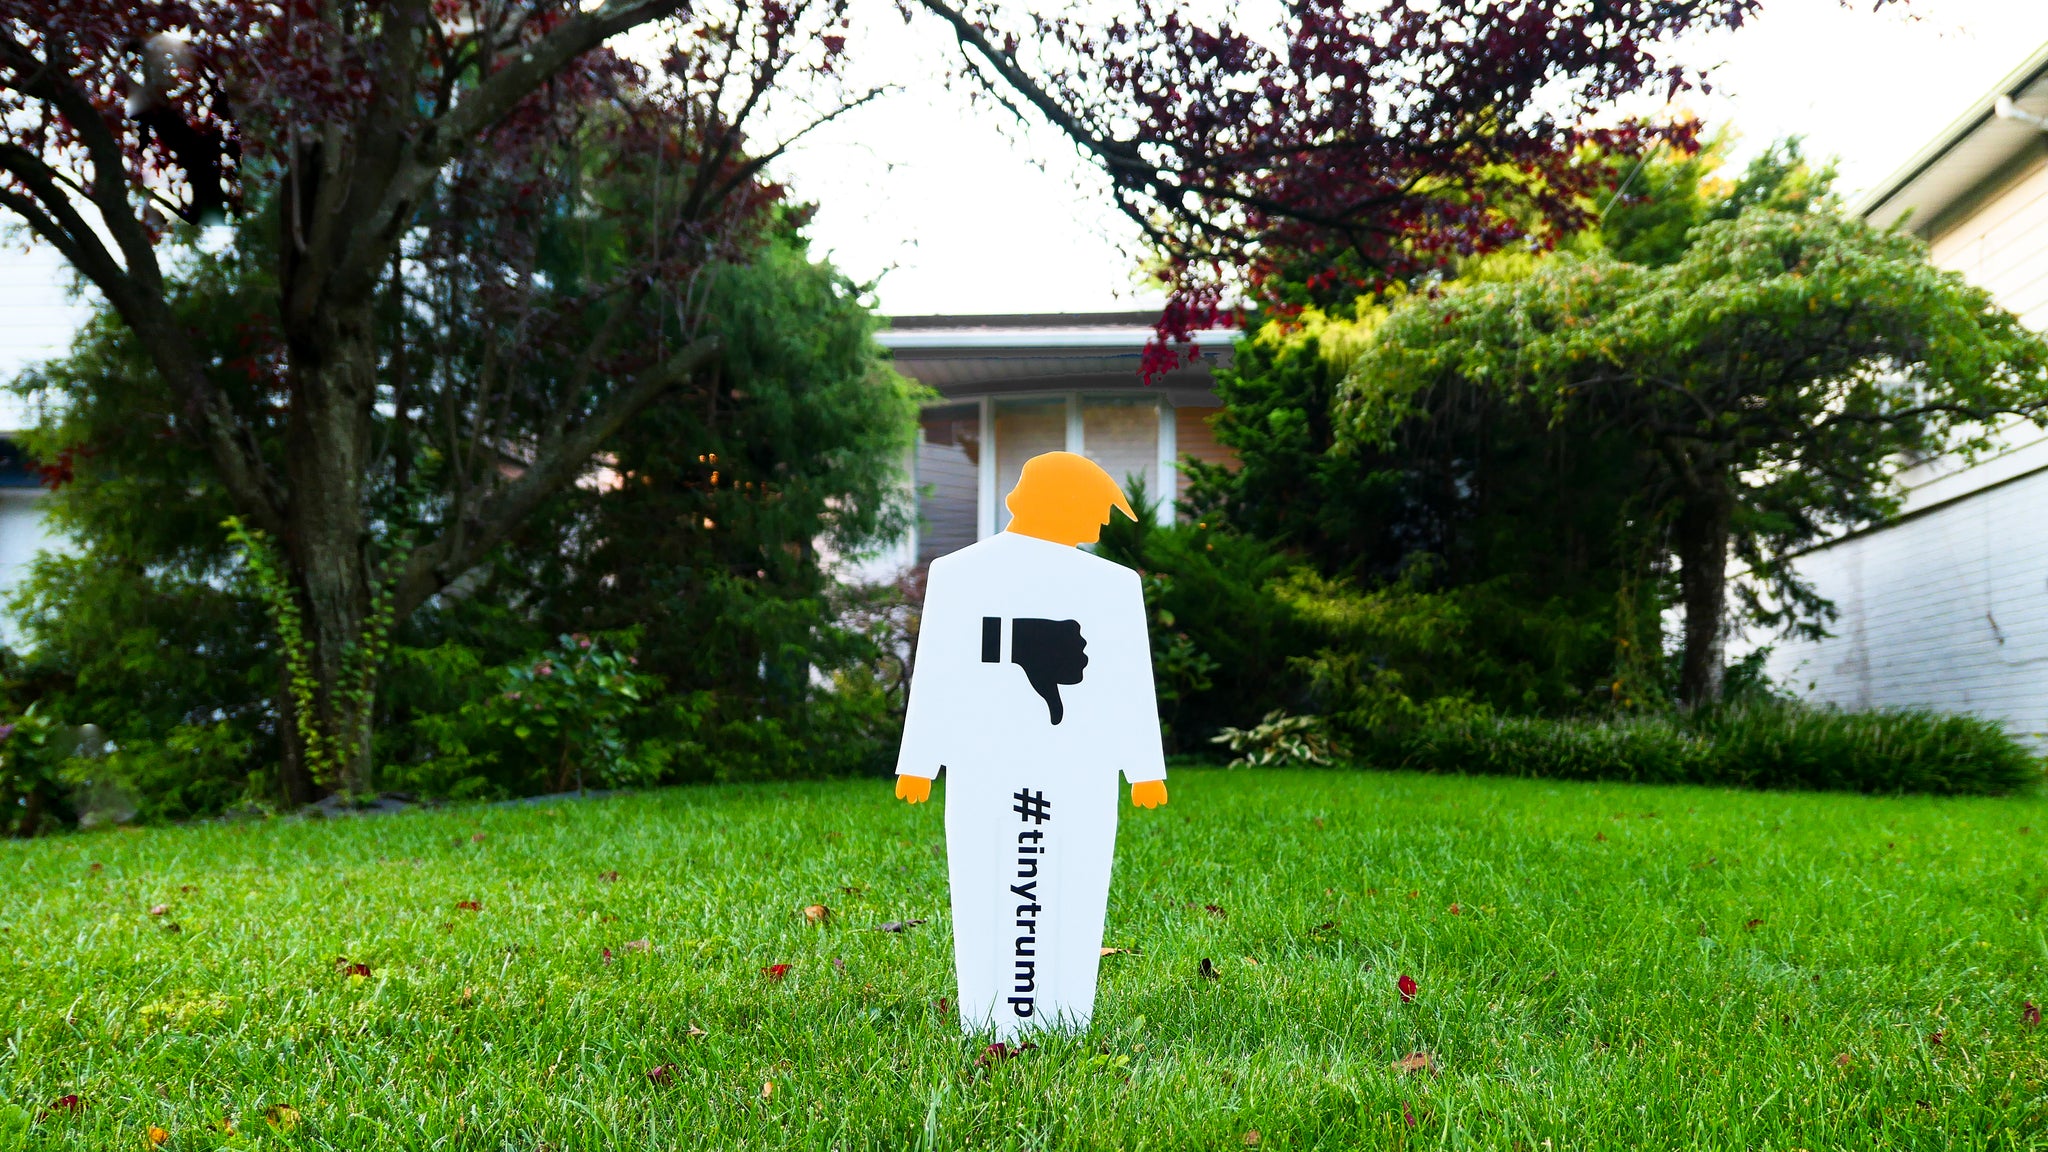 two foot tall tiny trump lawn sign (white coroplast trump cutout with orange head and hands) with a thumbs down sign in the chest standing on a suburban lawn